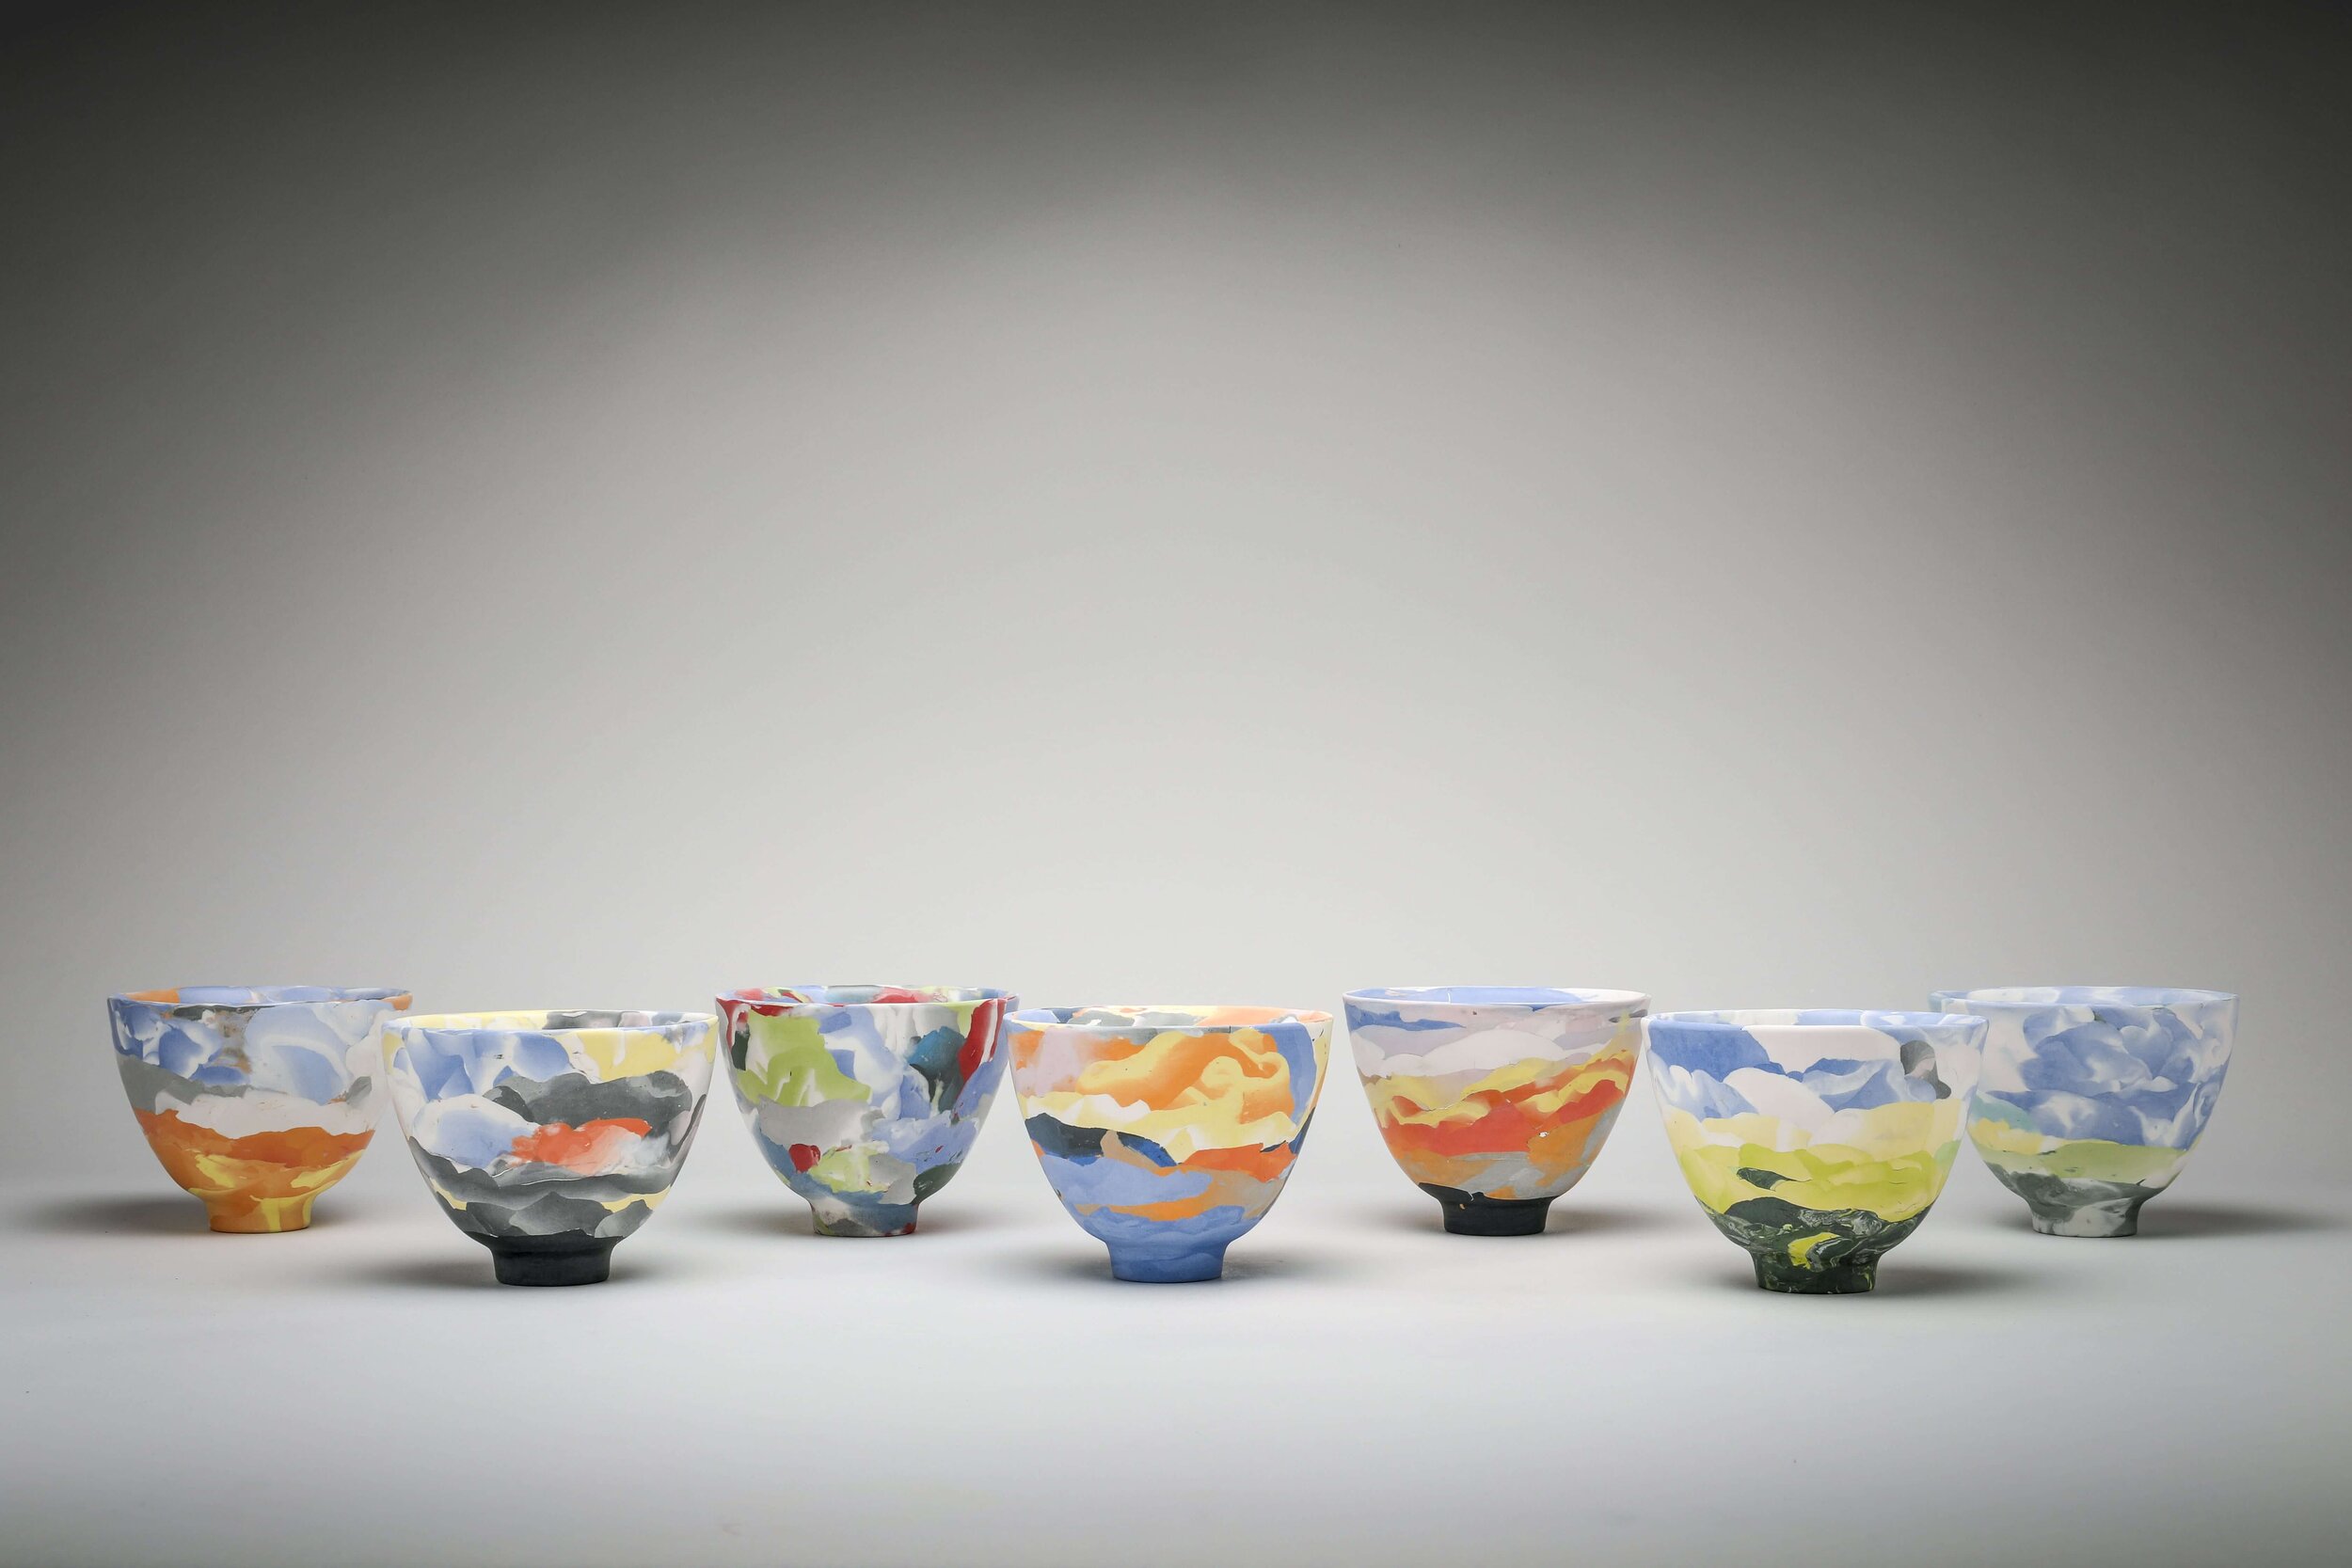 A grouping of the small-footed vessels